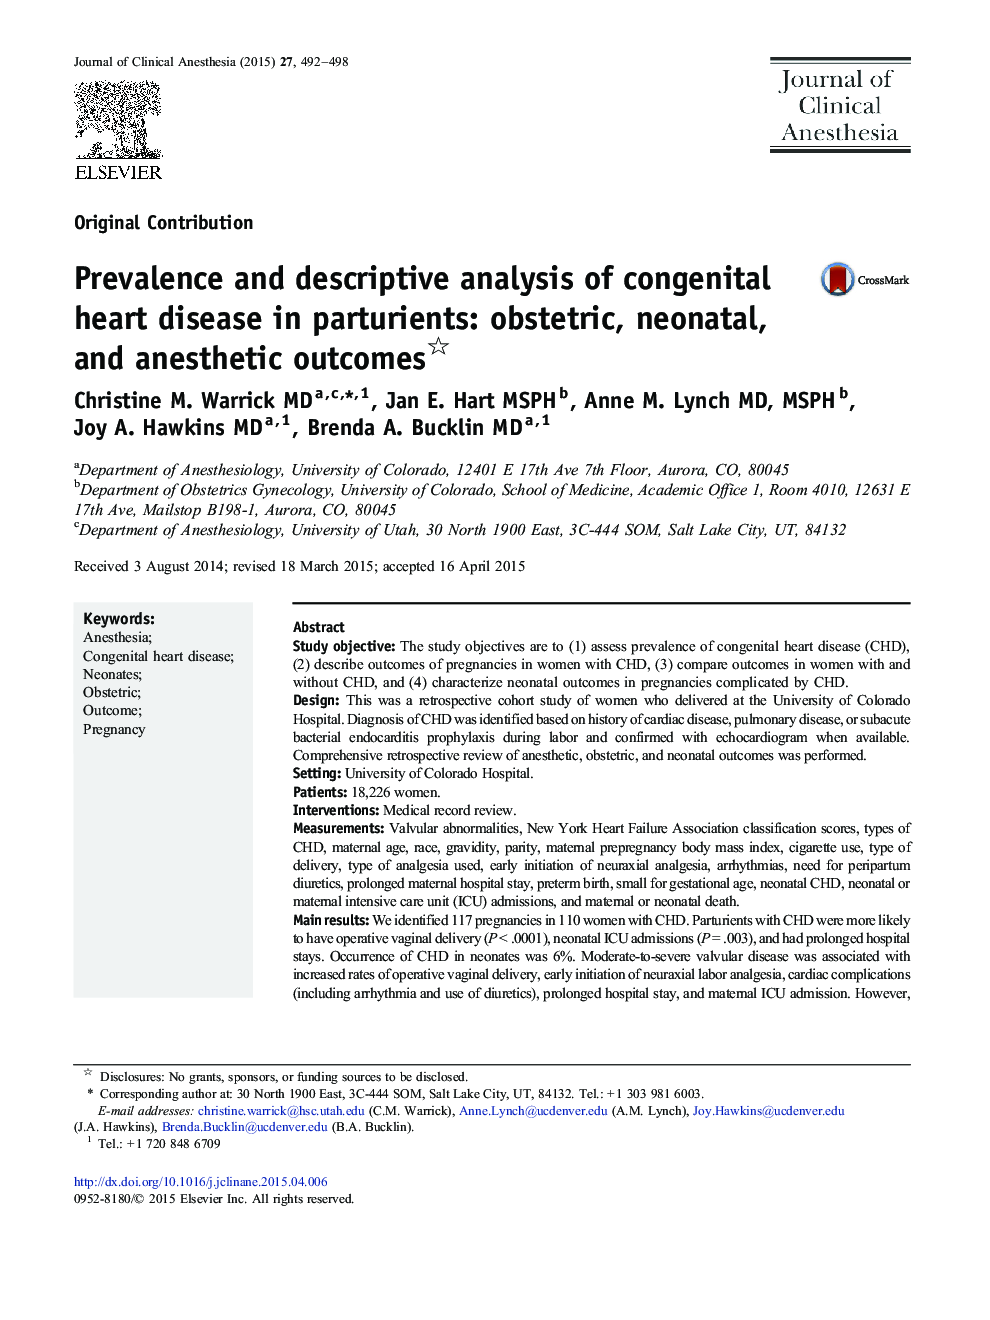 Prevalence and descriptive analysis of congenital heart disease in parturients: obstetric, neonatal, and anesthetic outcomes 